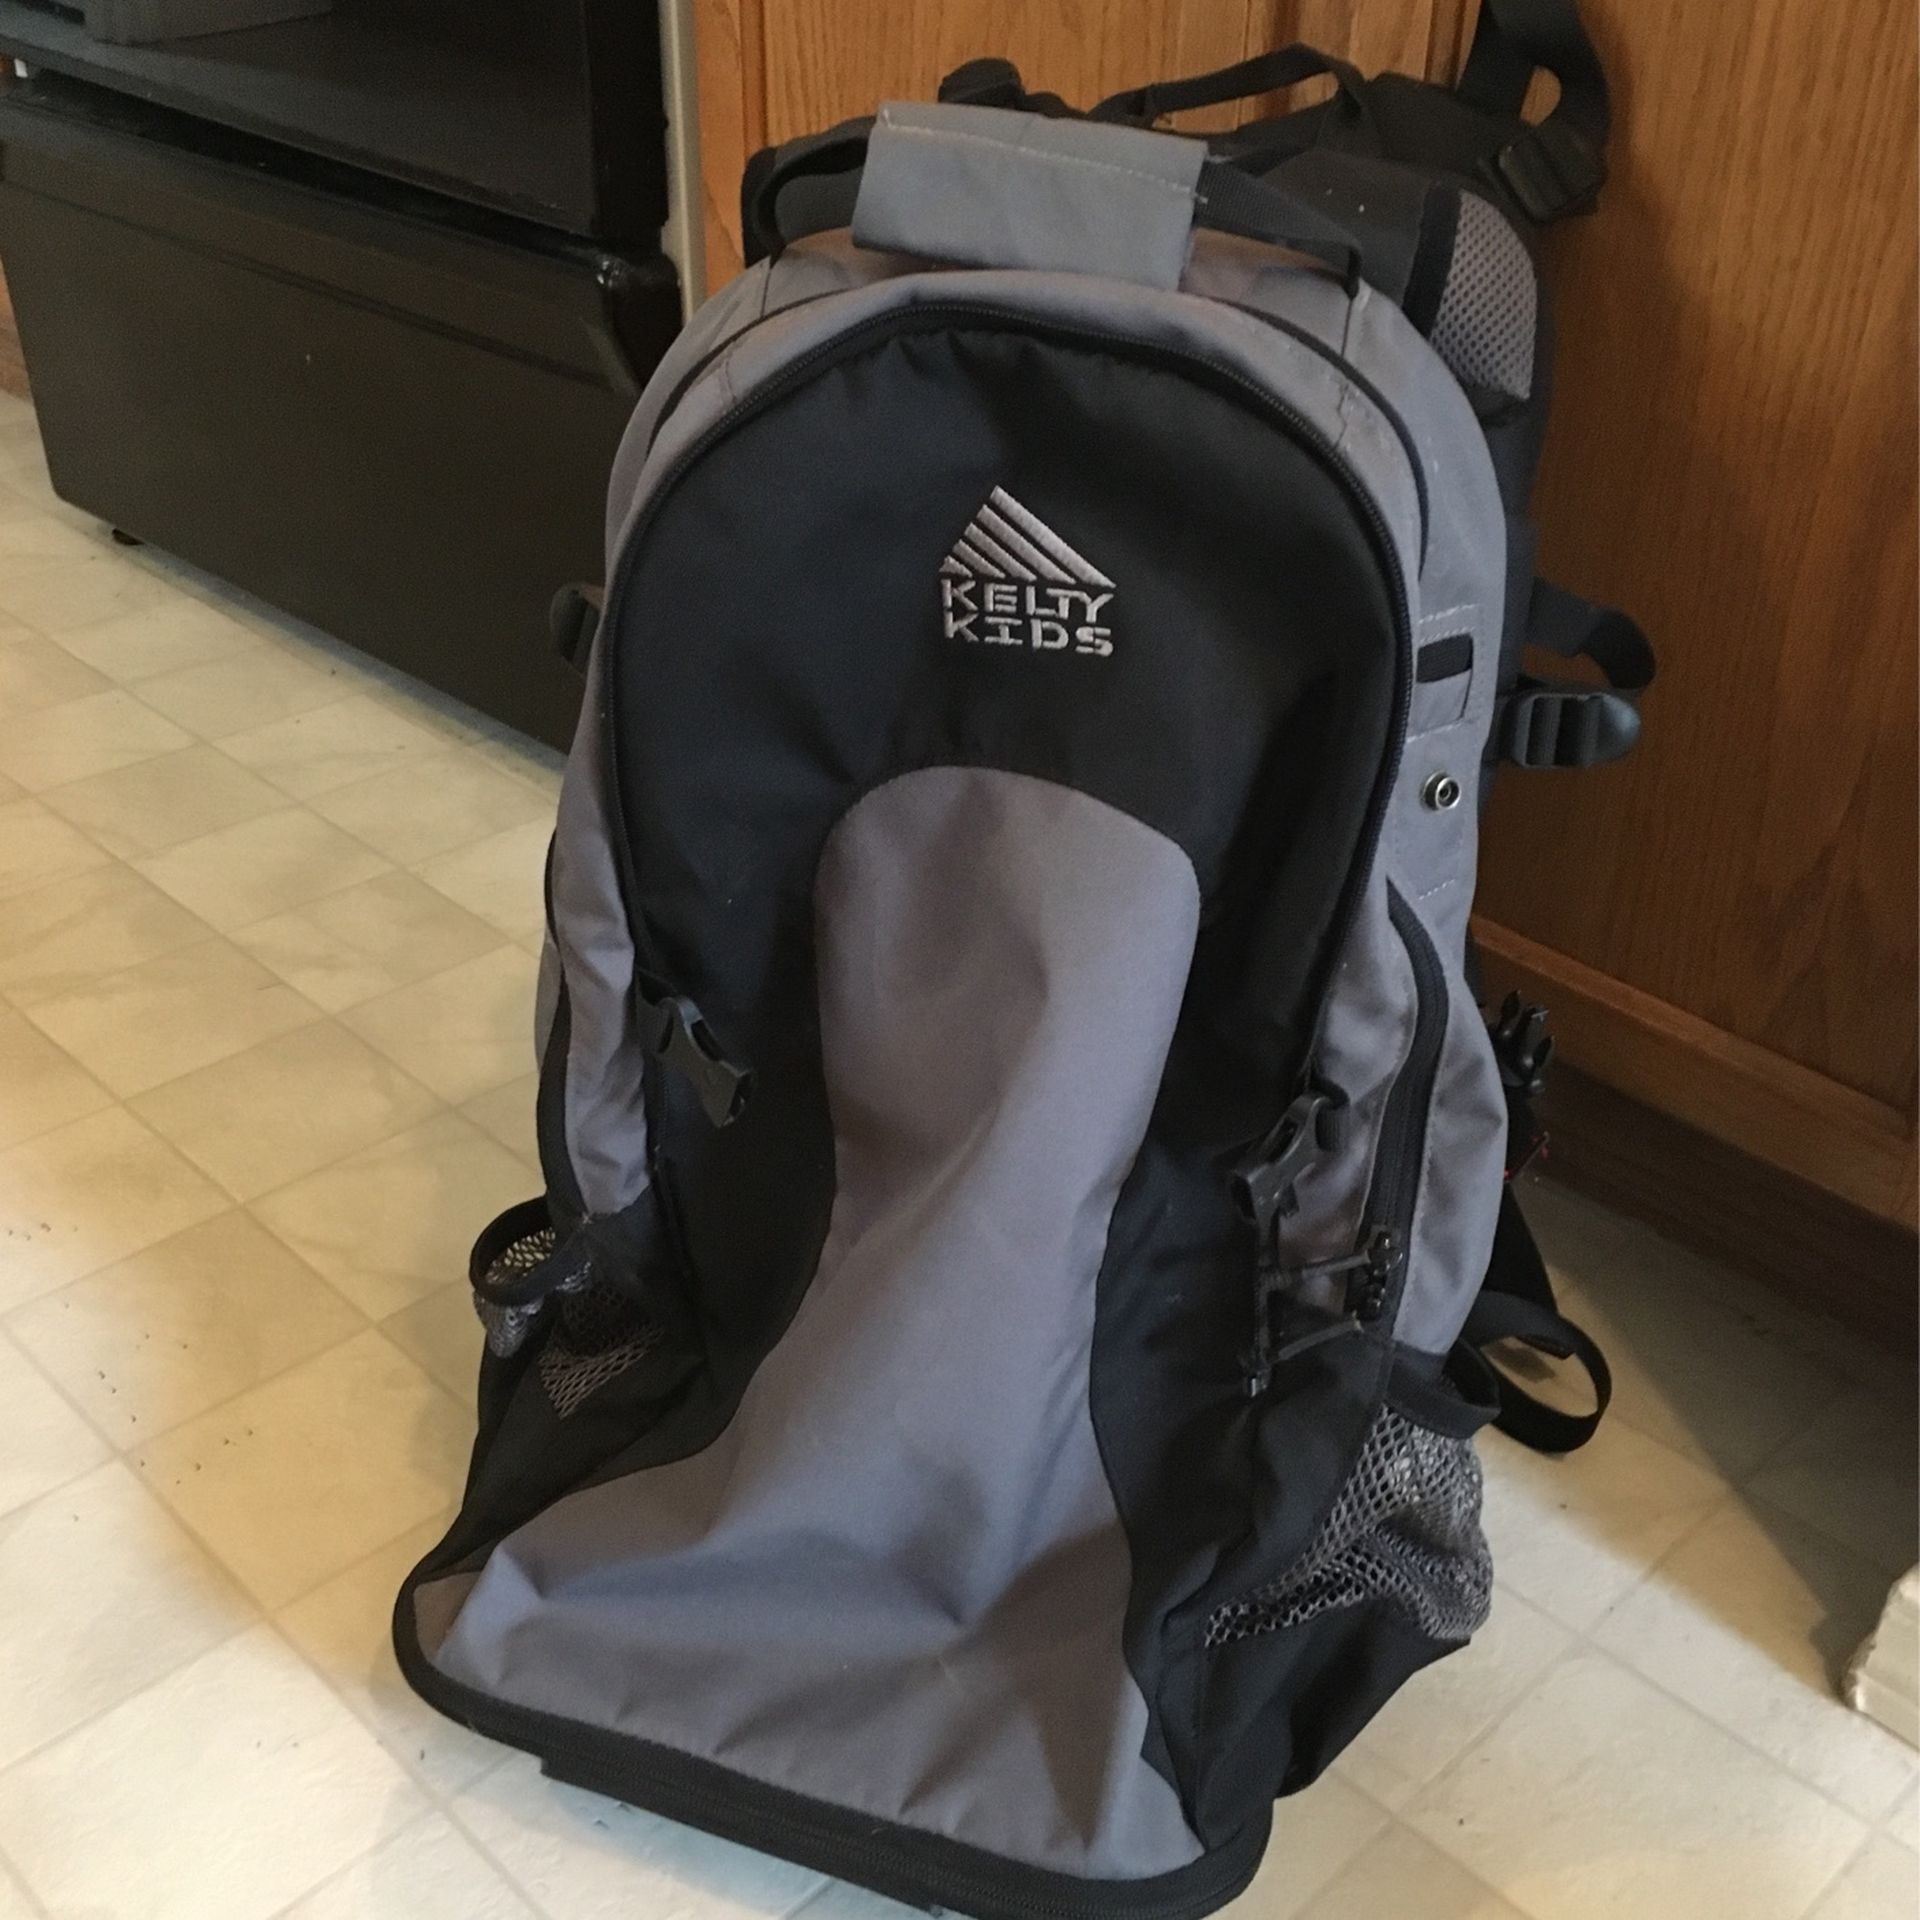 Kelty Kids Carrier And Backpack